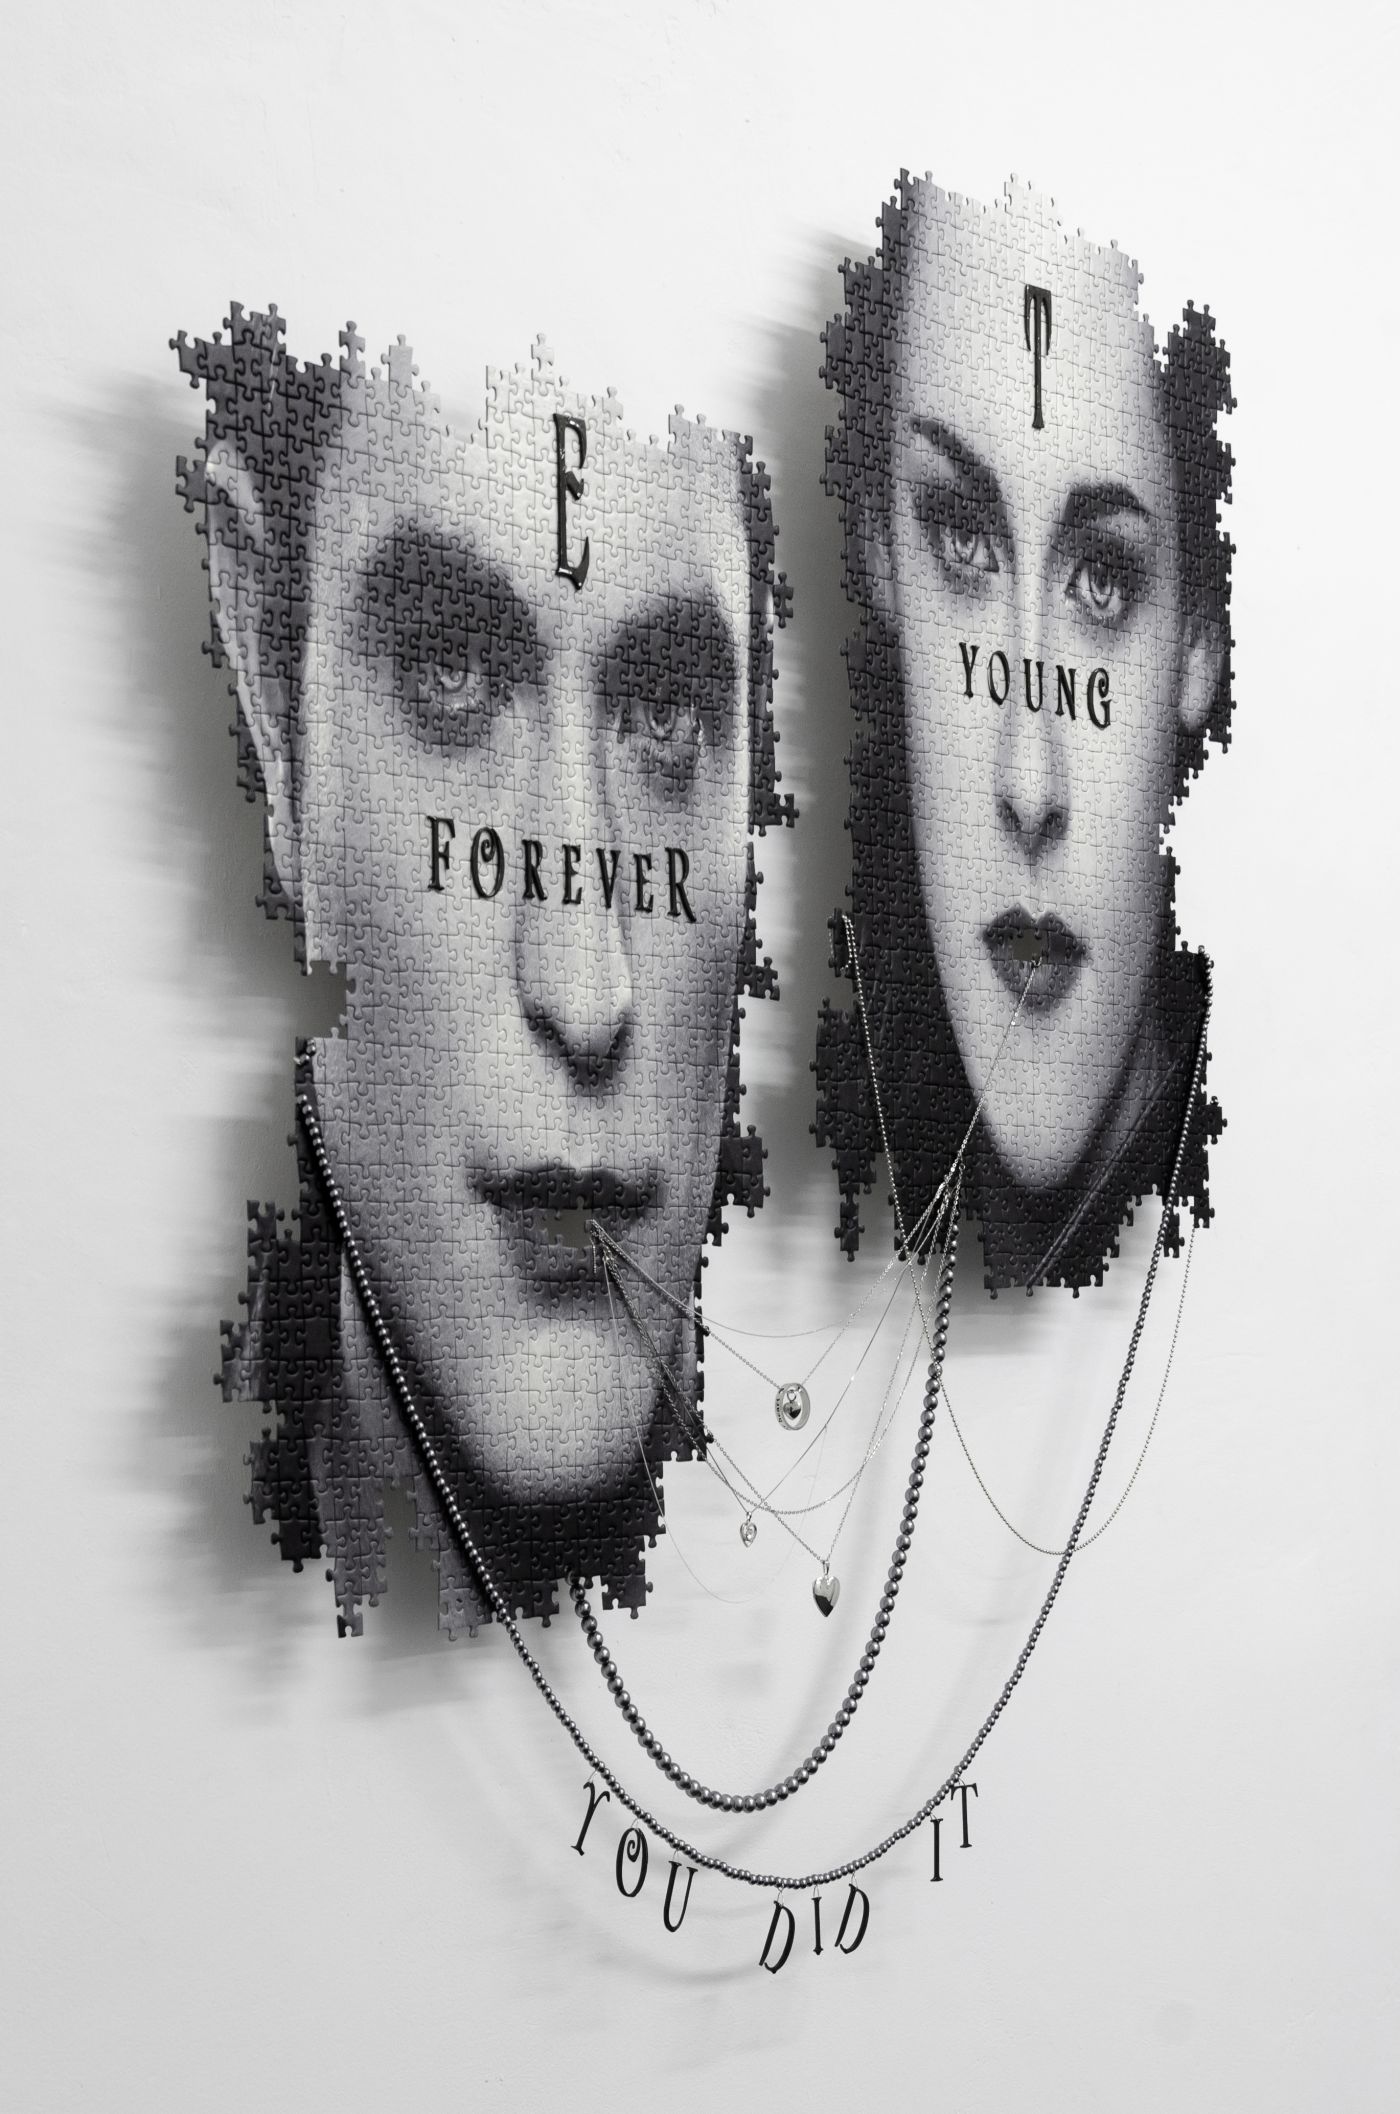 Julian-Jakob Kneer, EROS / THANATOS (YOU DID IT, FOREVER YOUNG), 2021, Digital print on puzzle, silver and steel chains, engraved silver and steel lockets, plastic coated jewelry, aluminium construction, 105cm x 90cm x 7cm